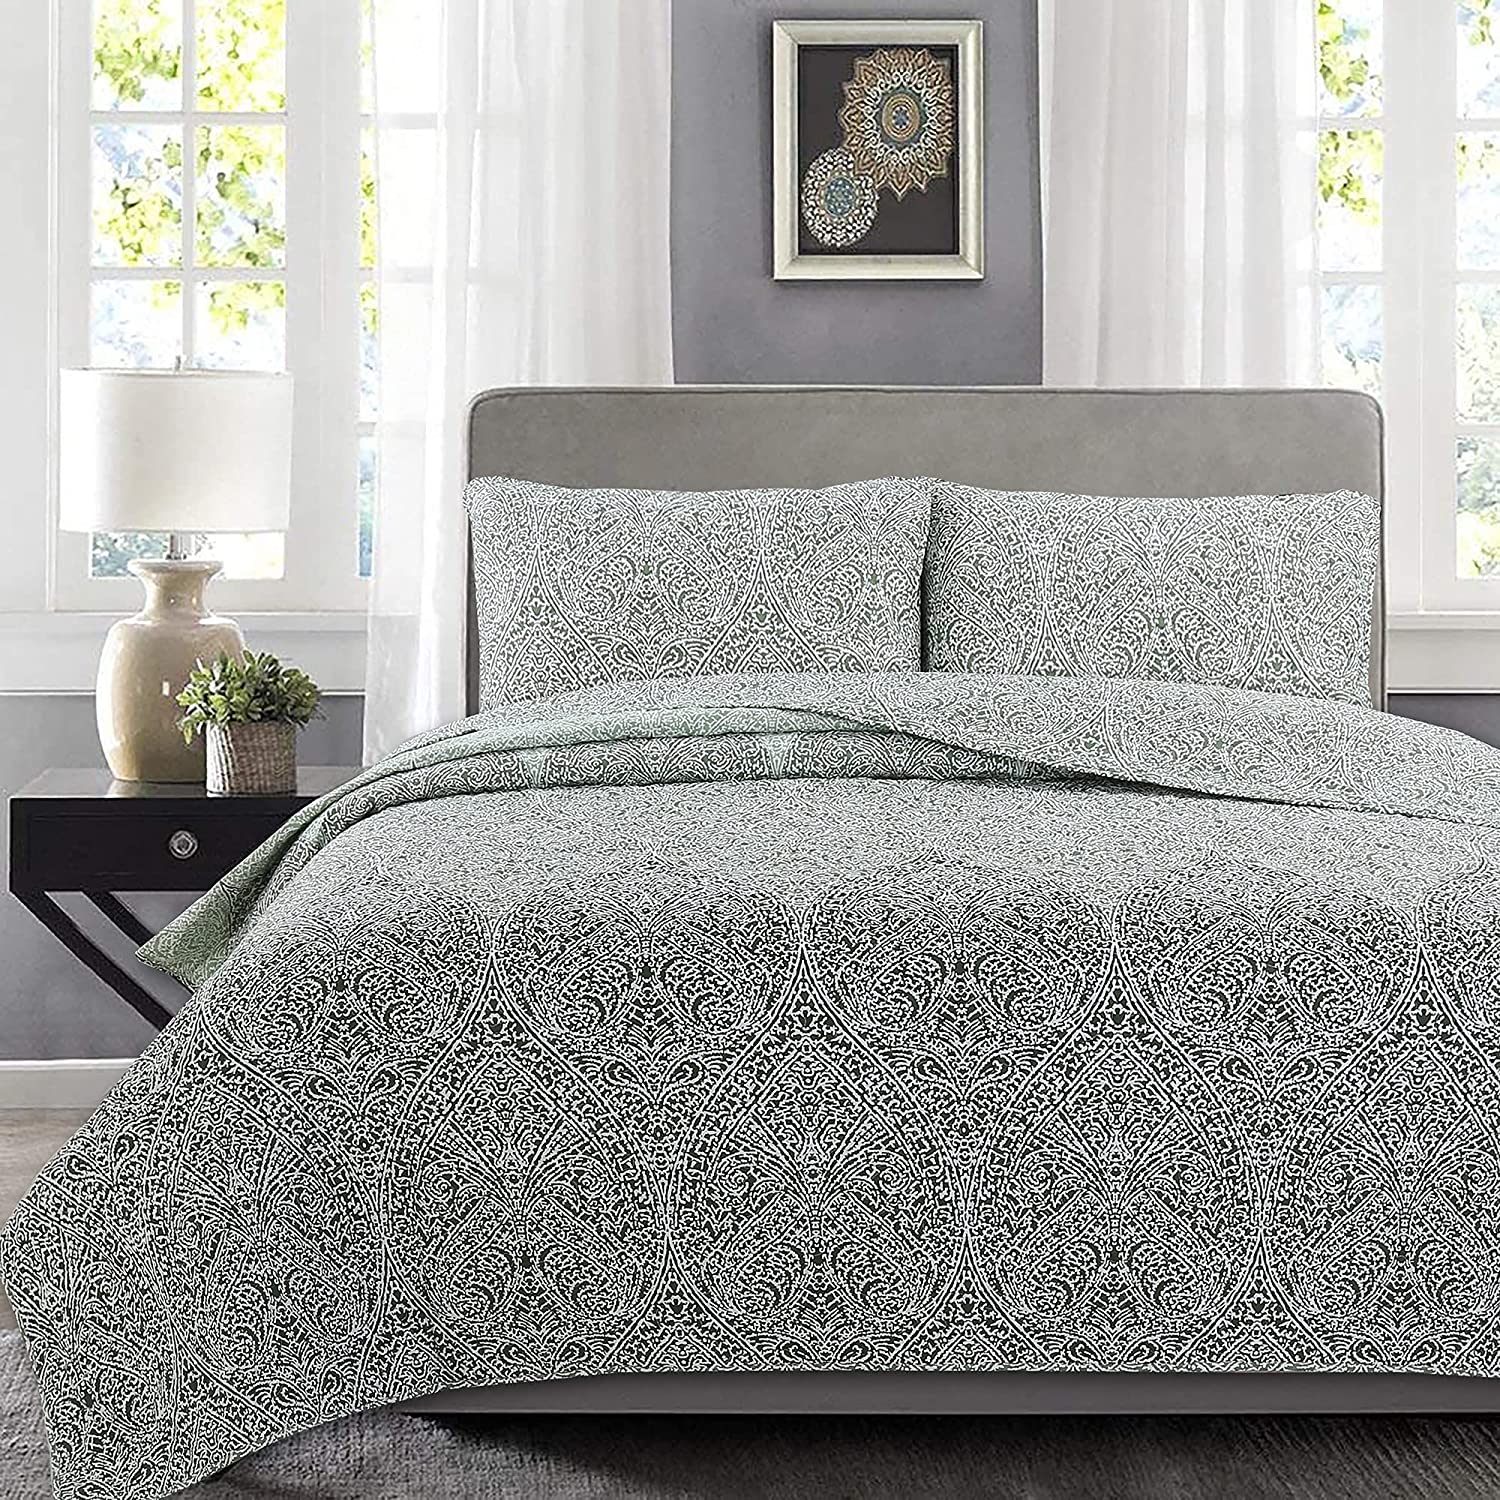 Details about   Cozy Line Home Fashions French Medallion Black White Grey Rose Flower Pattern Pr 